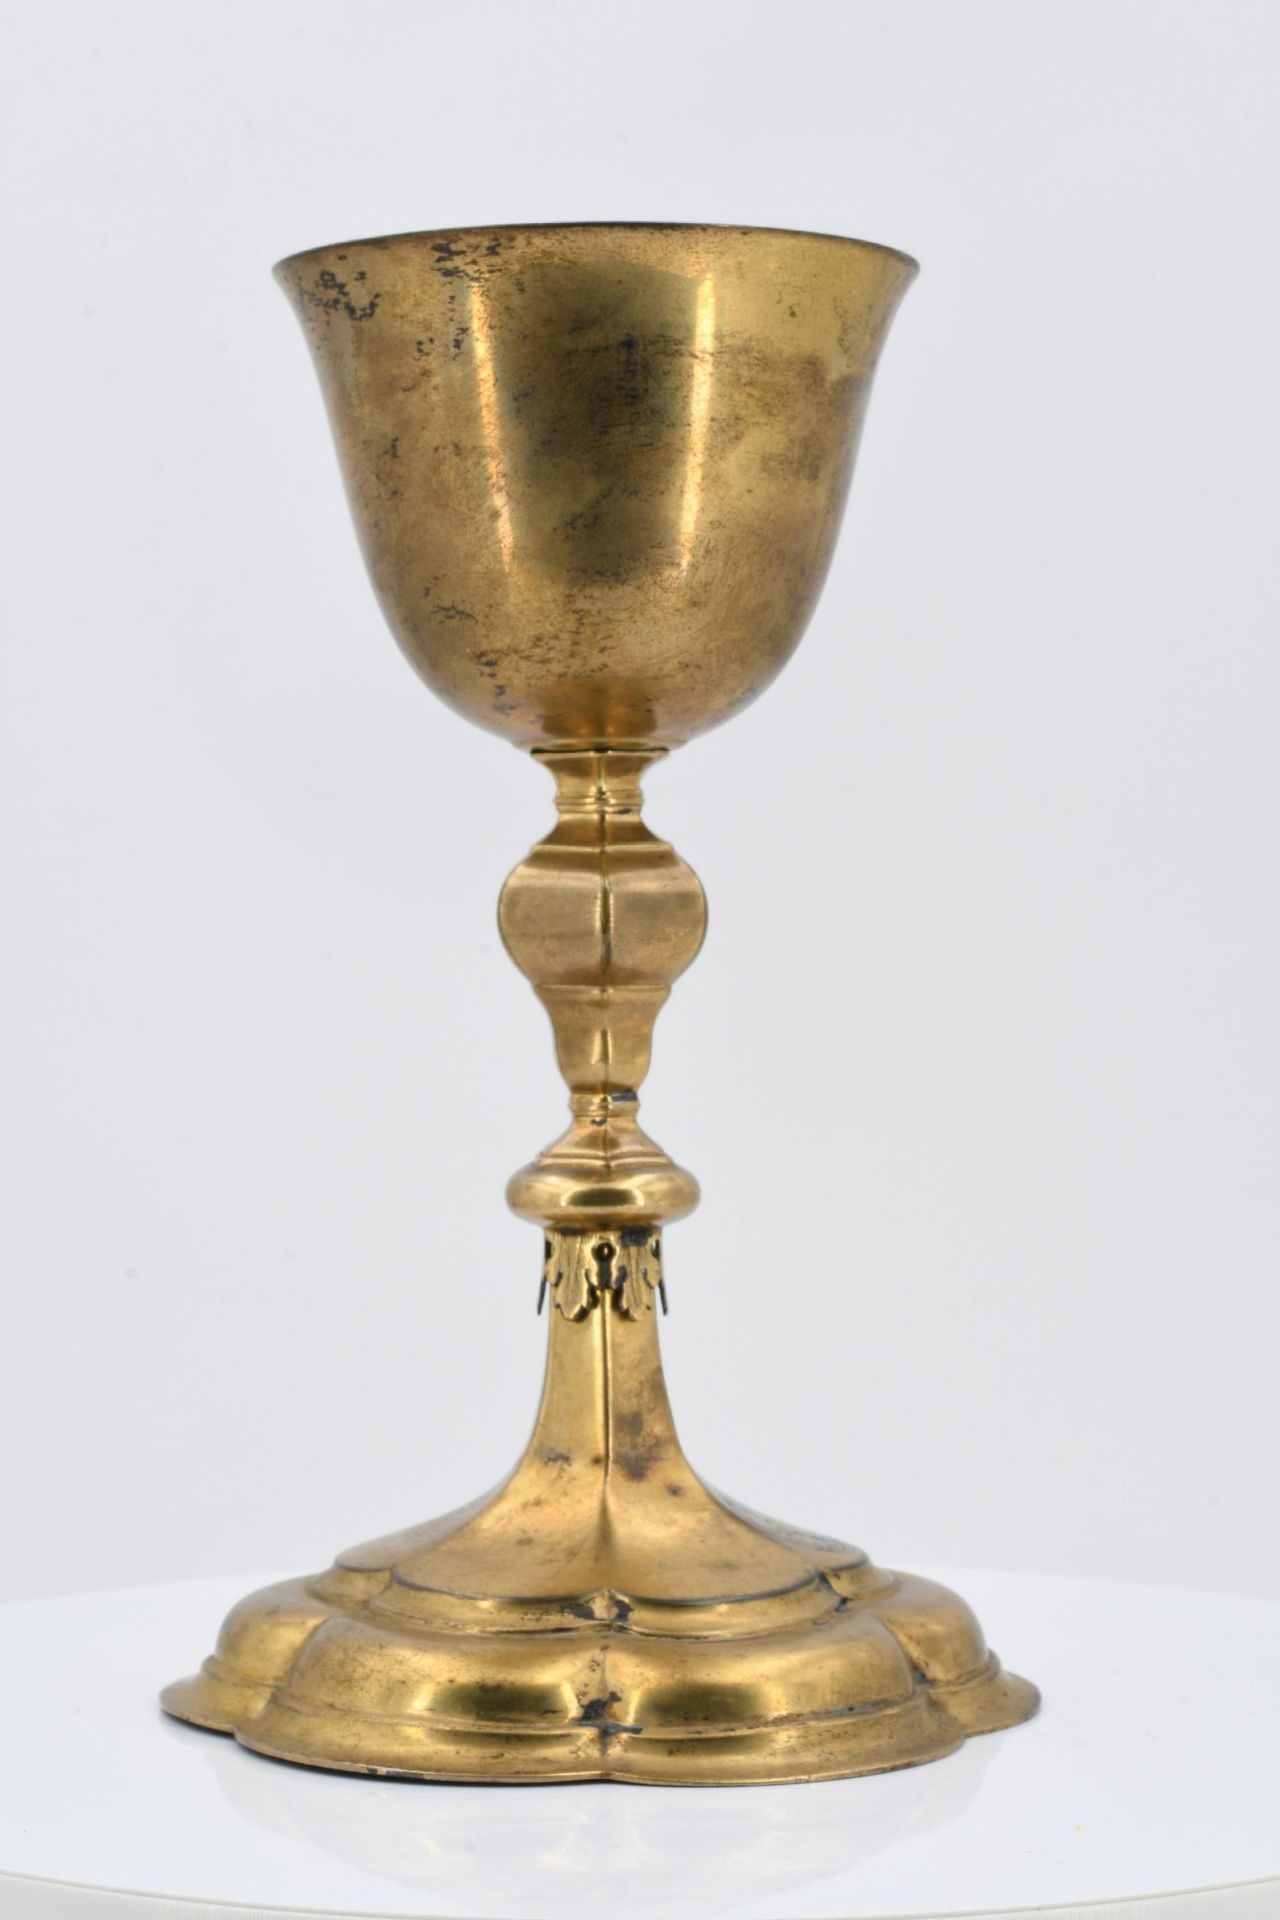 Chalice - Image 4 of 6